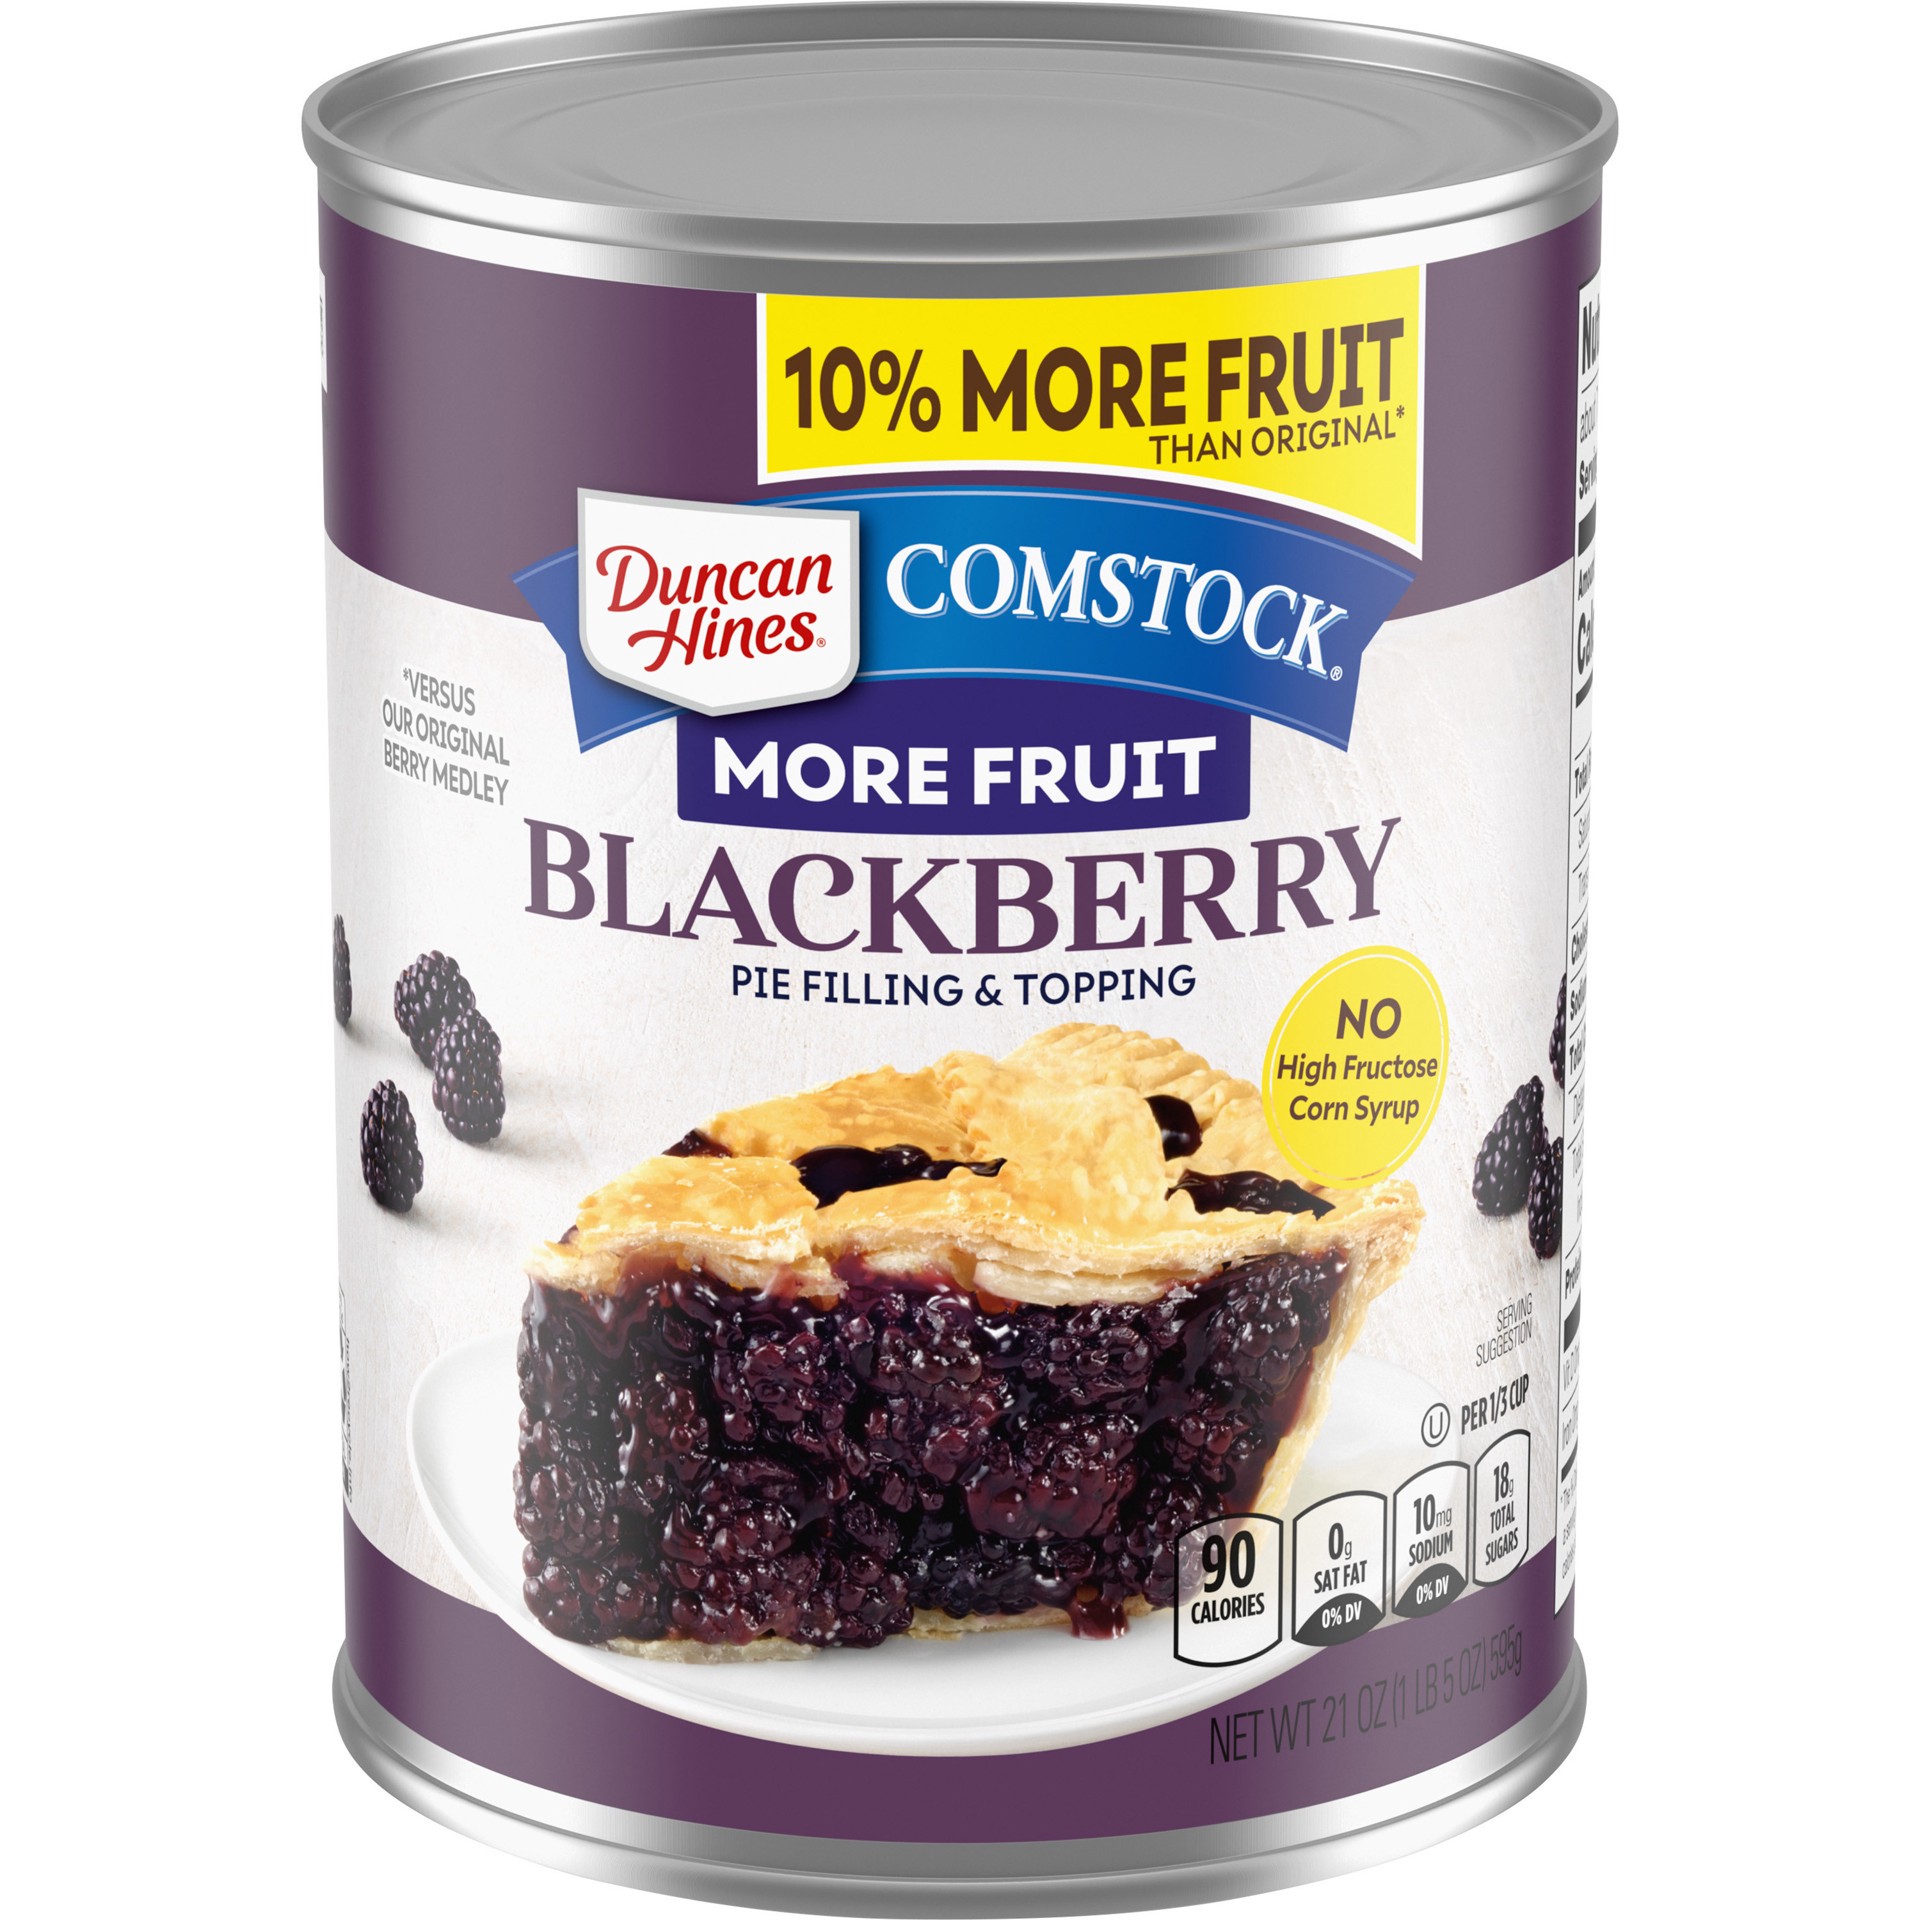 slide 1 of 3, Duncan Hines Comstock Original Blackberry Pie Filling and Topping, 21 oz., 21 oz